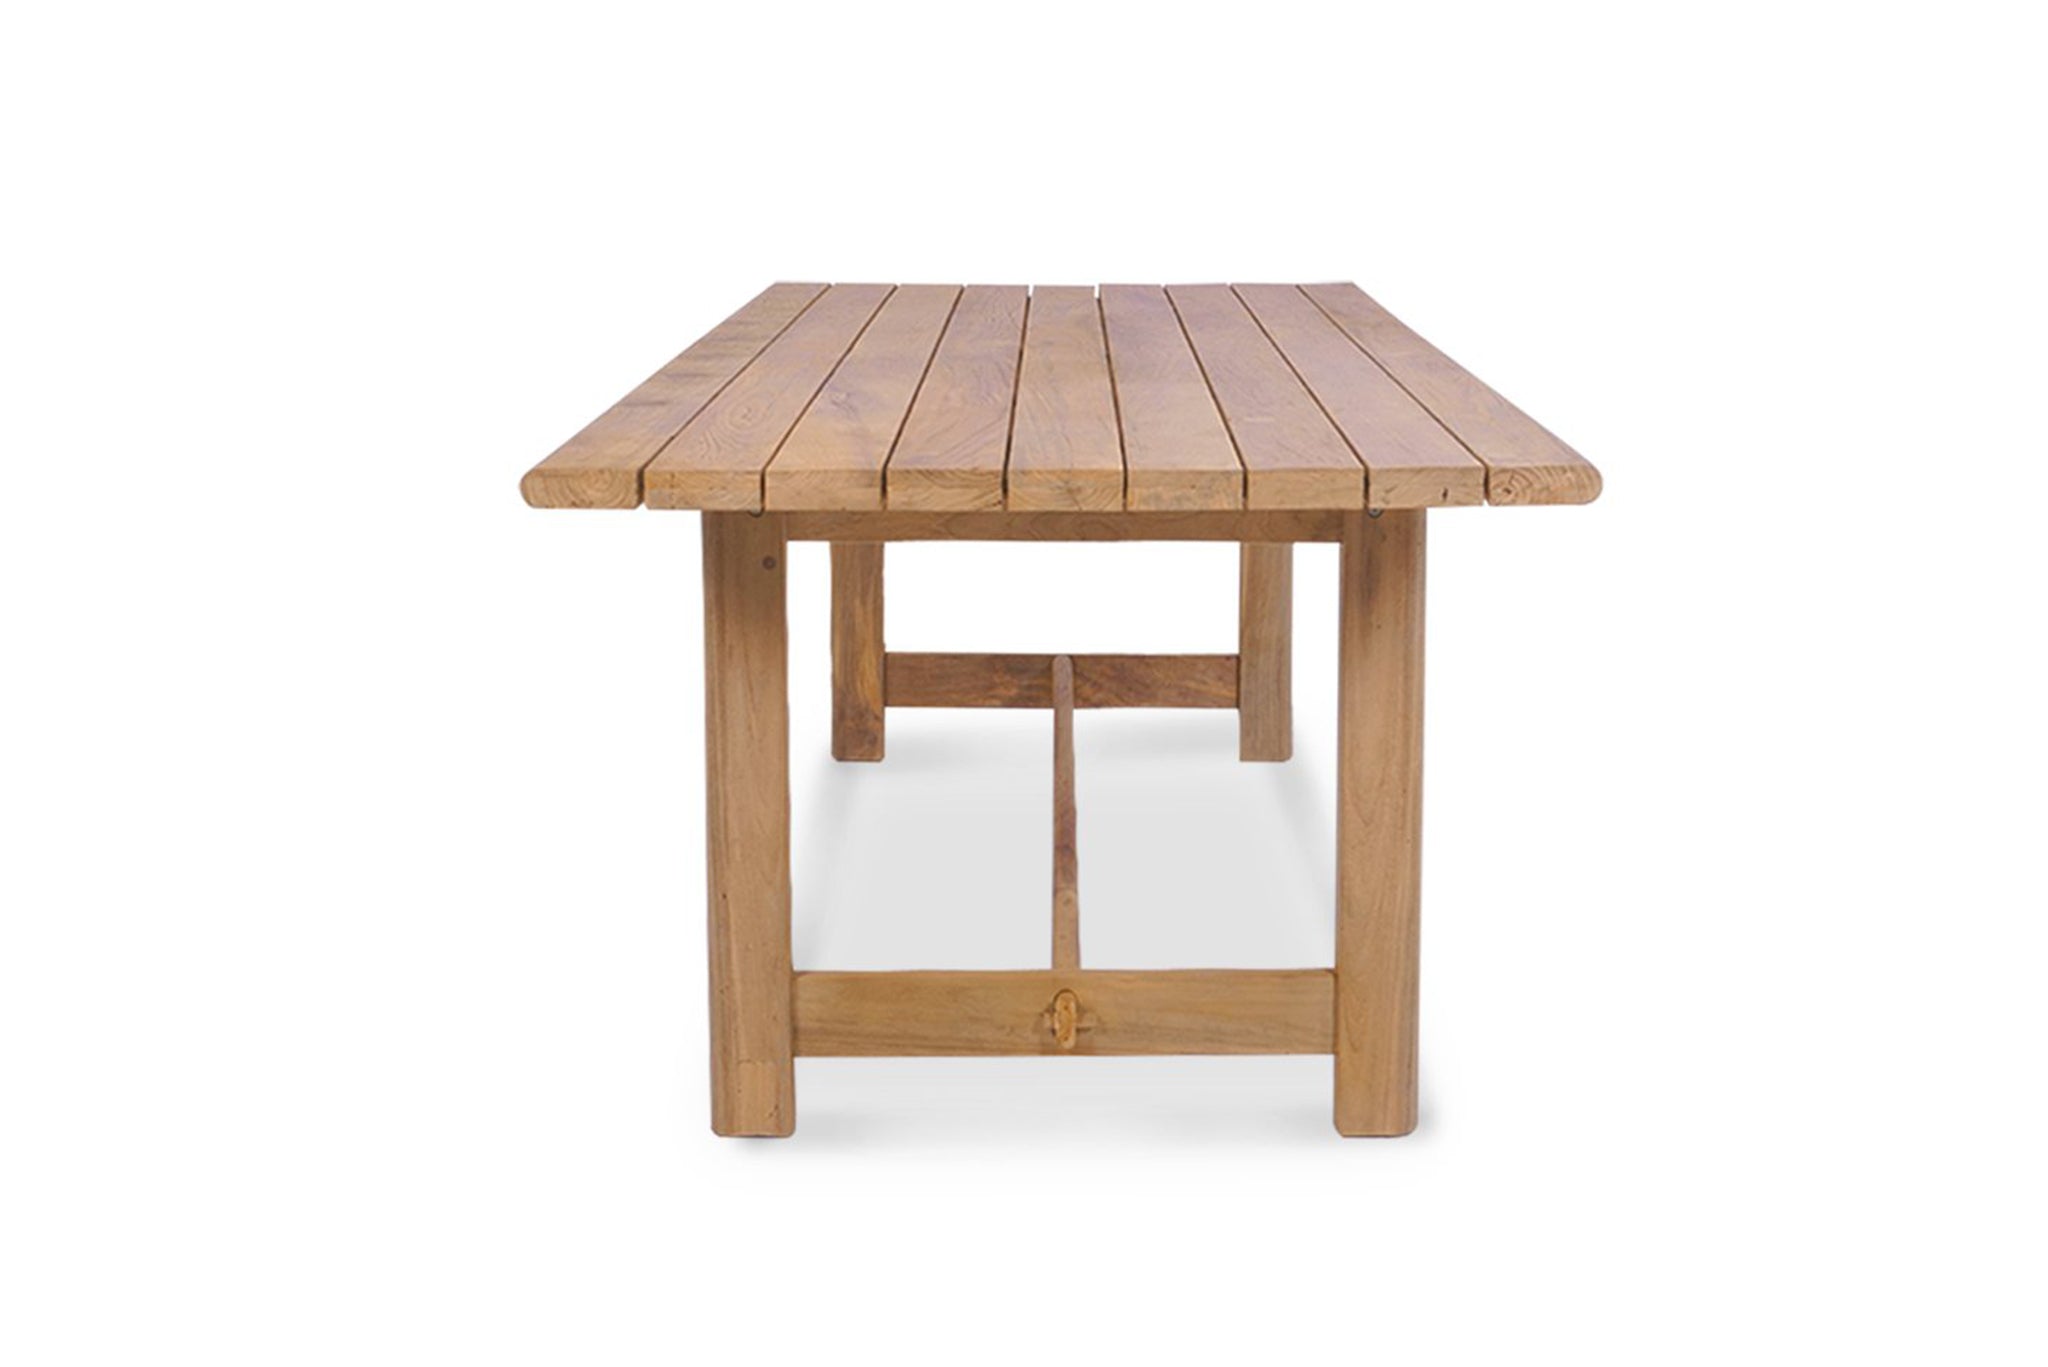 Manly Reclaimed Teak Outdoor Dining Table – 2.5m